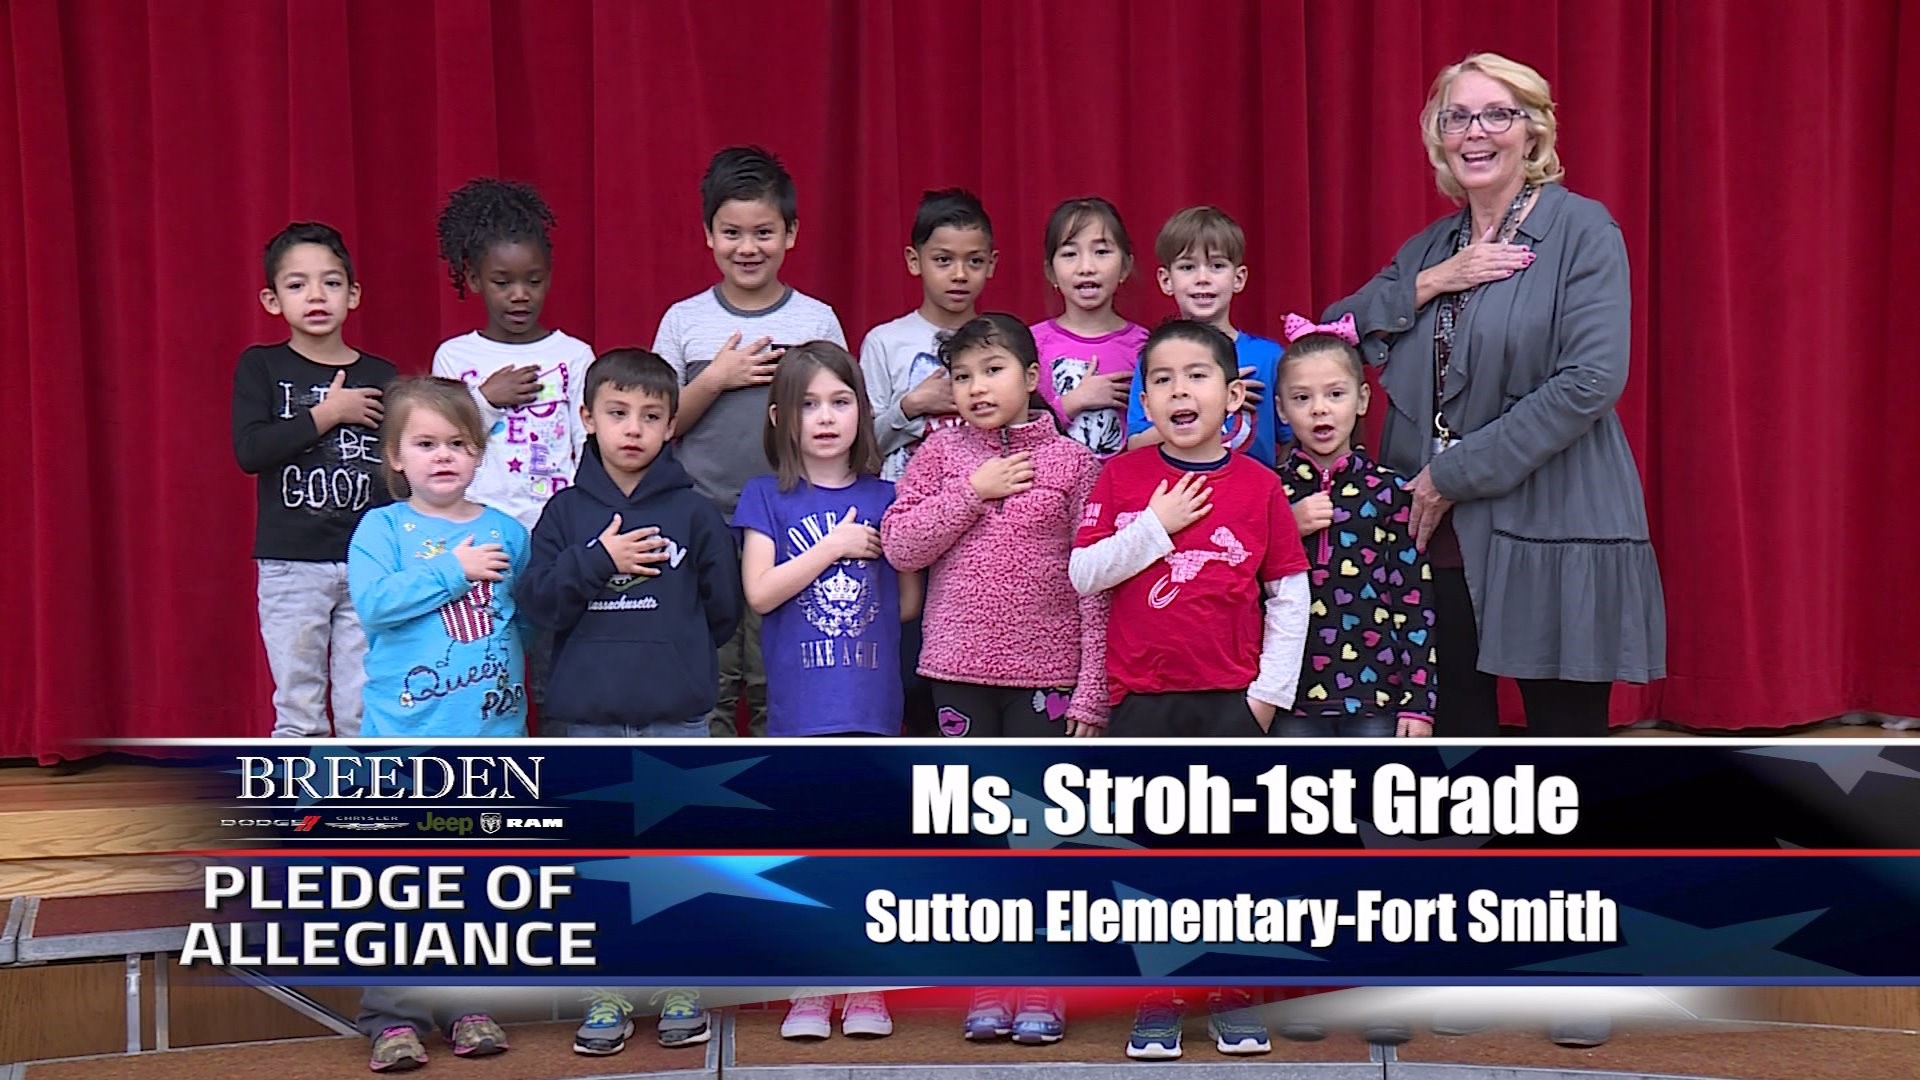 Ms. Stroh  1st Grade Sutton Elementary, Fort Smith